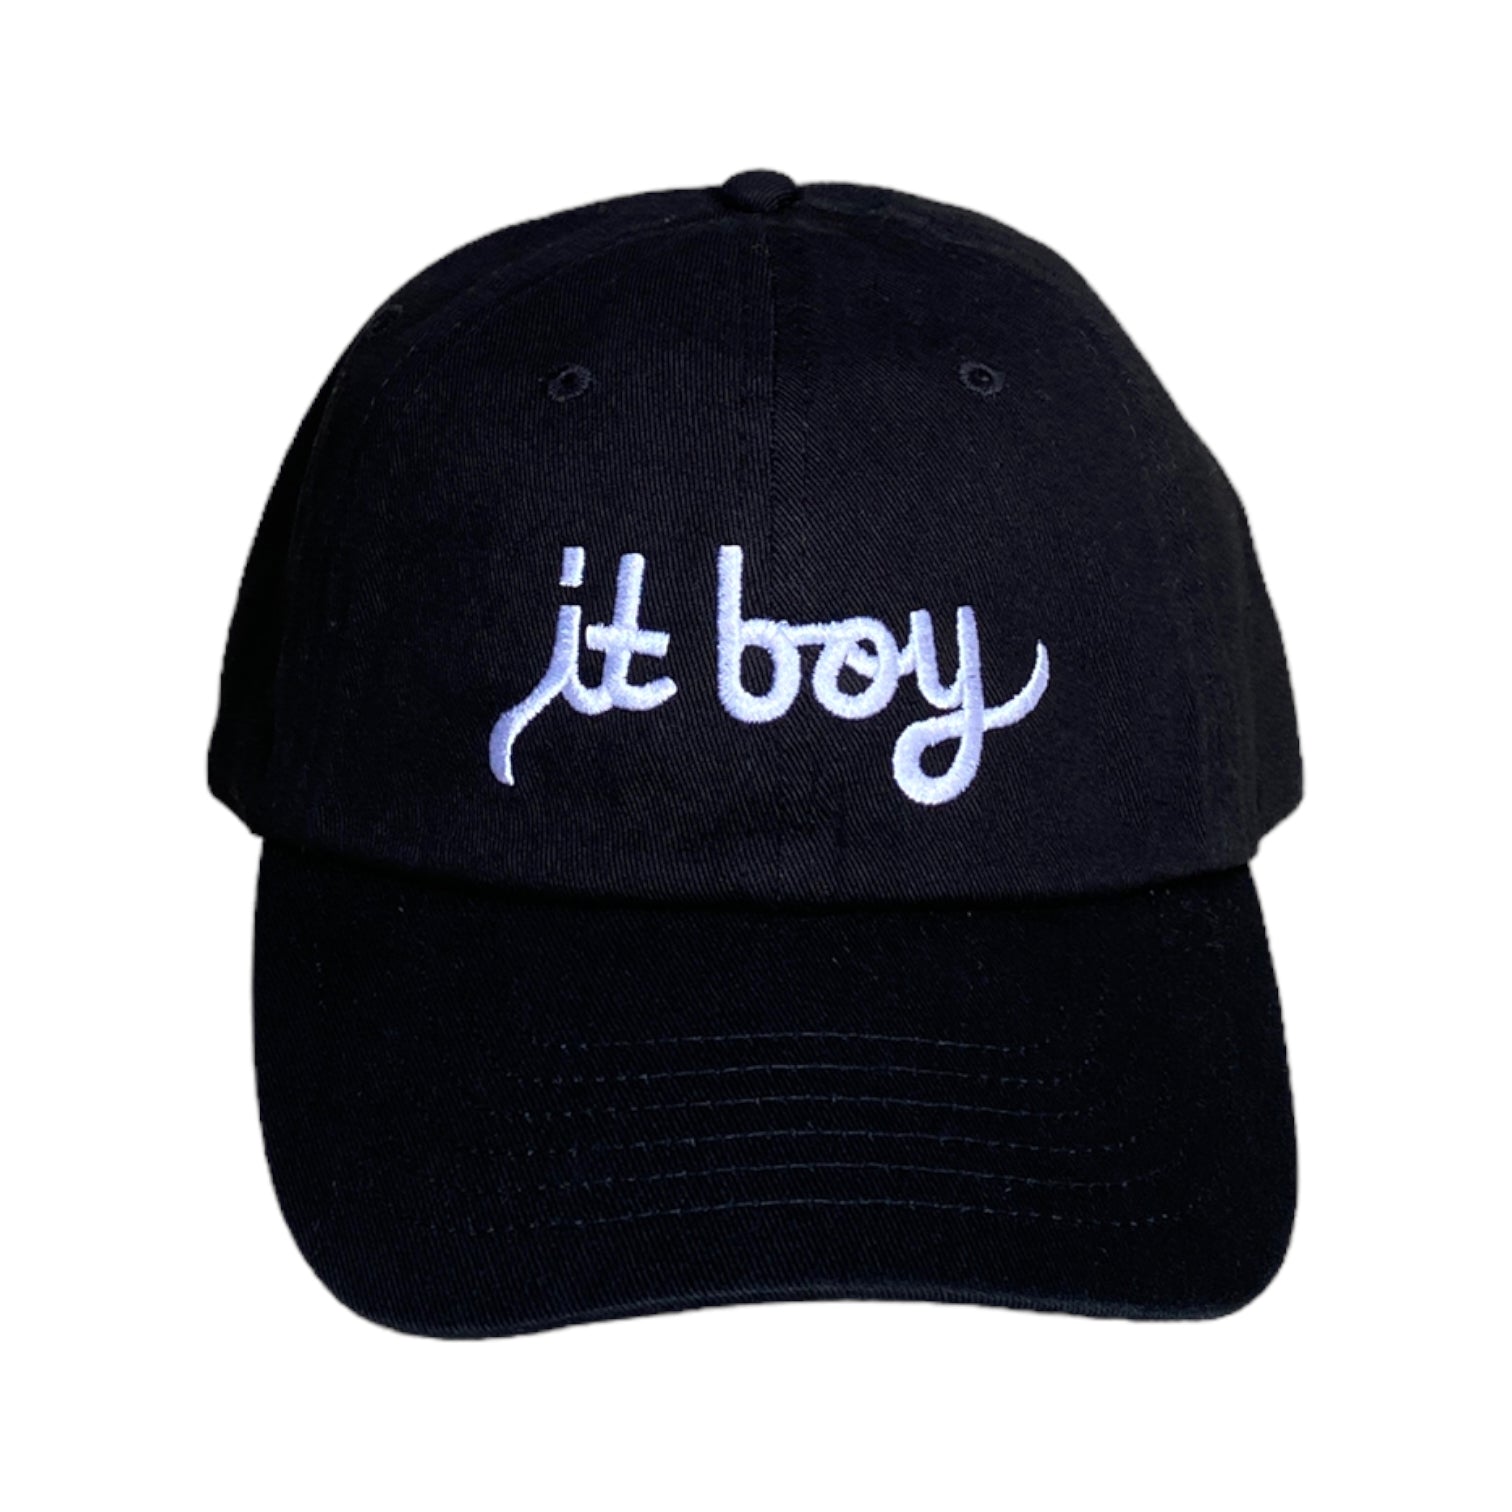 black baseball cap facing front with white embroidery reading it boy in cursive text across the front